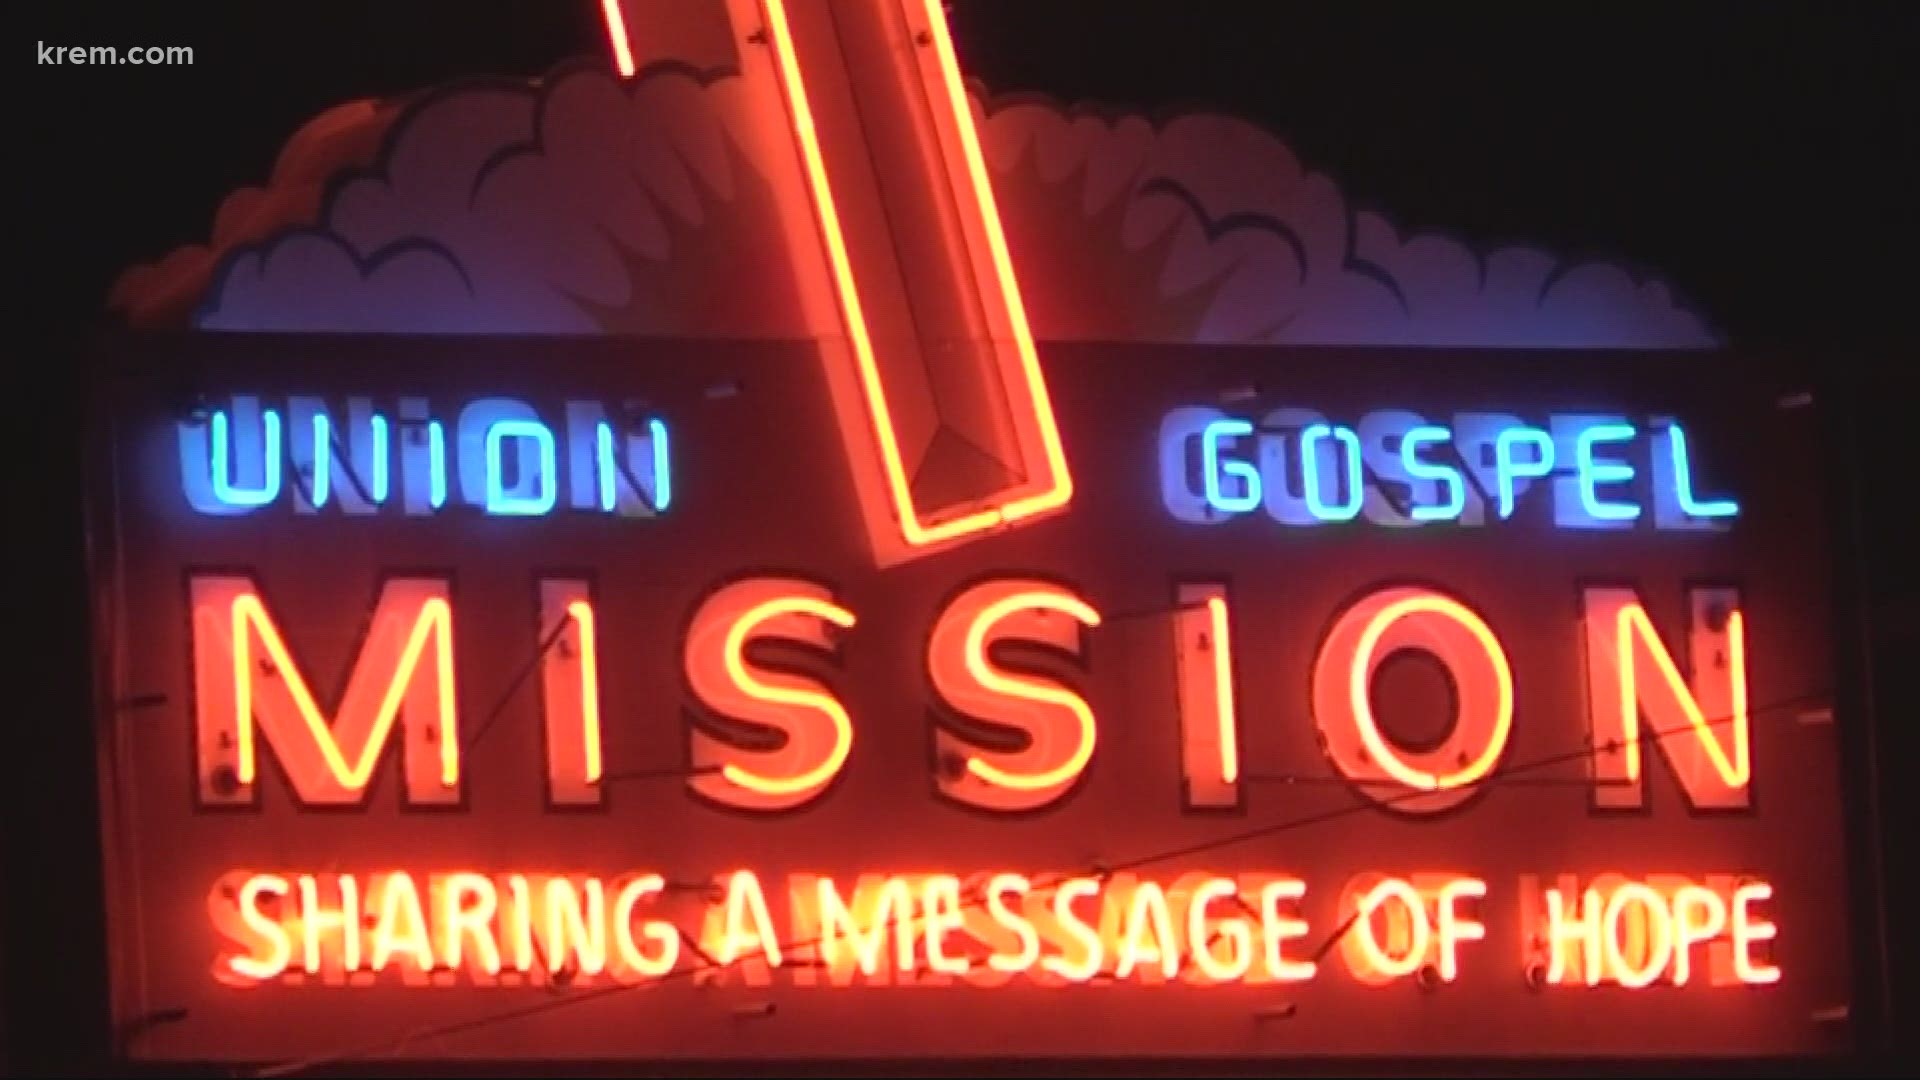 Amid a COVID-19 outbreak, Union Gospel Mission men's shelter closes for two weeks